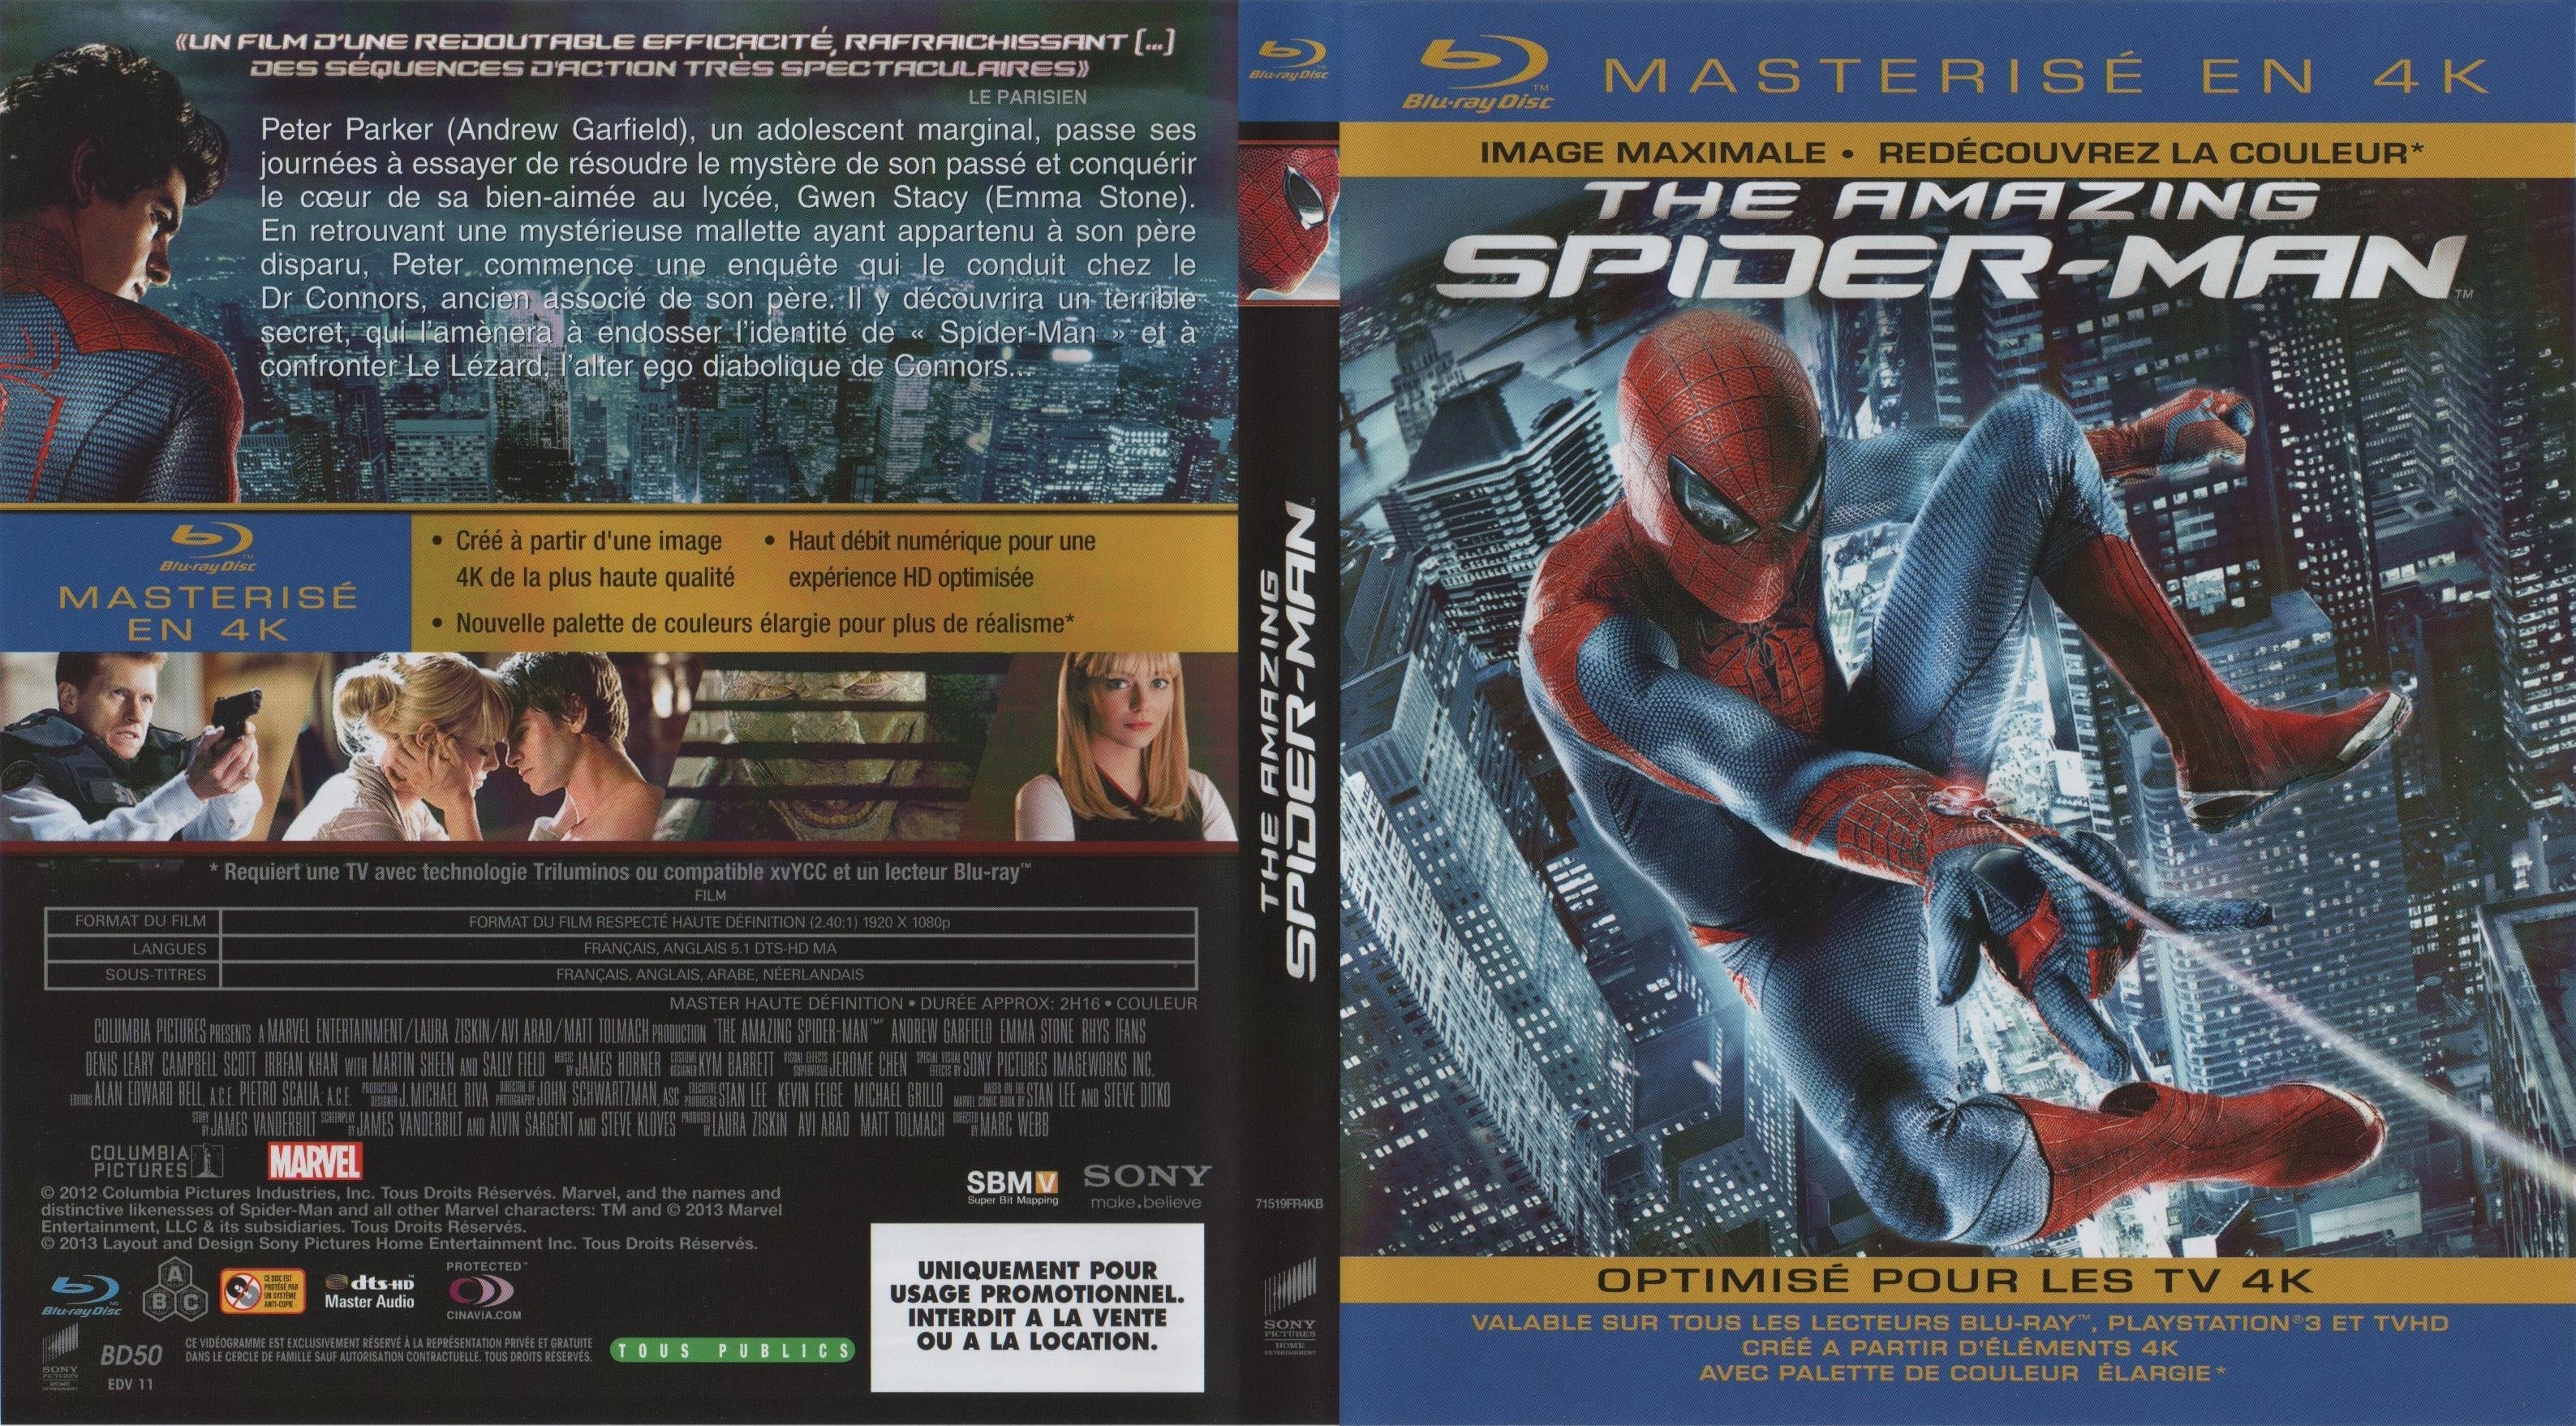 Jaquette DVD The Amazing Spider-Man (BLU-RAY) v3